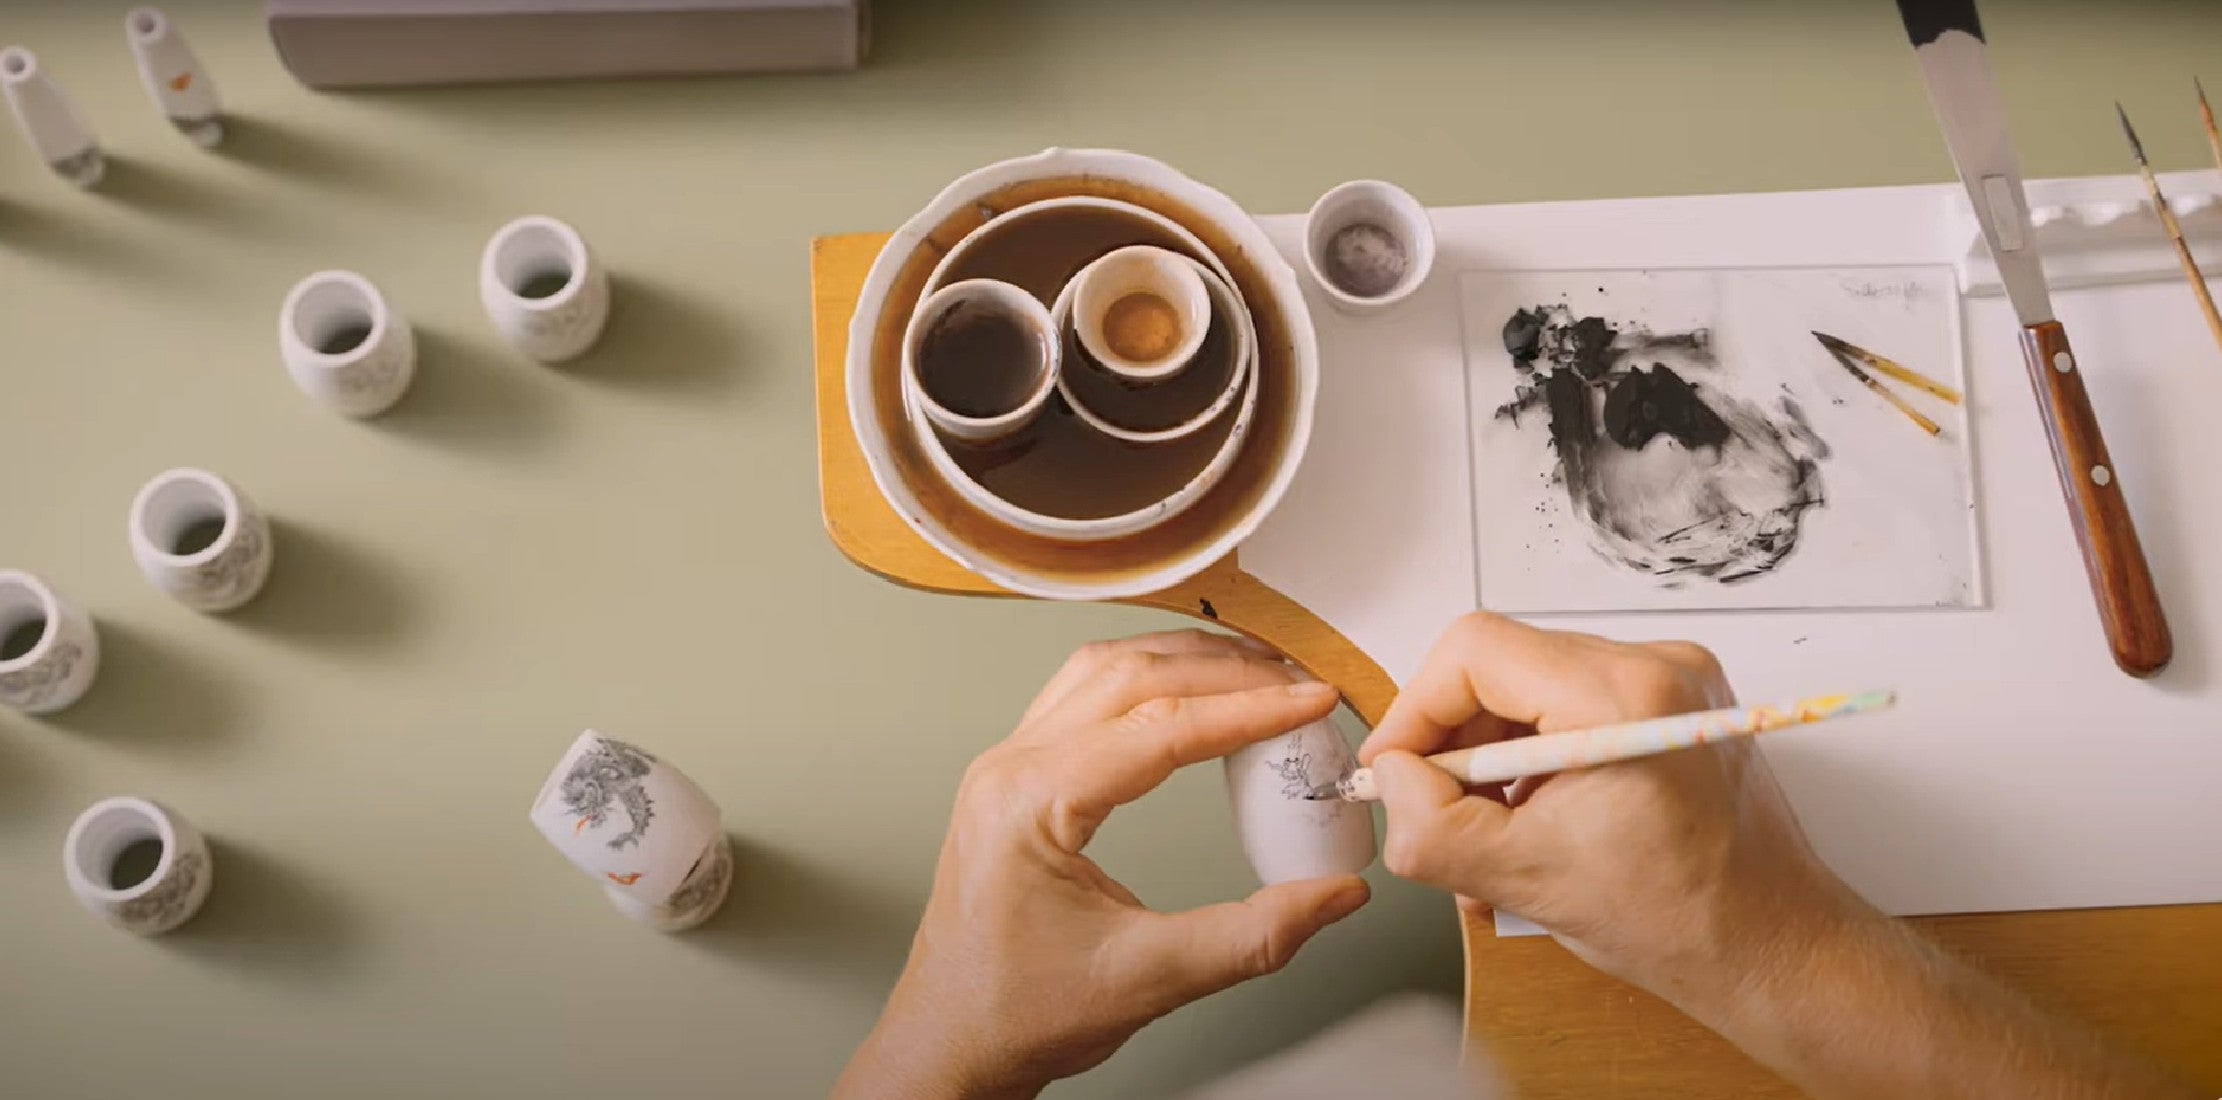 Video: Behind the Scenes with MÜHLE and MEISSEN®